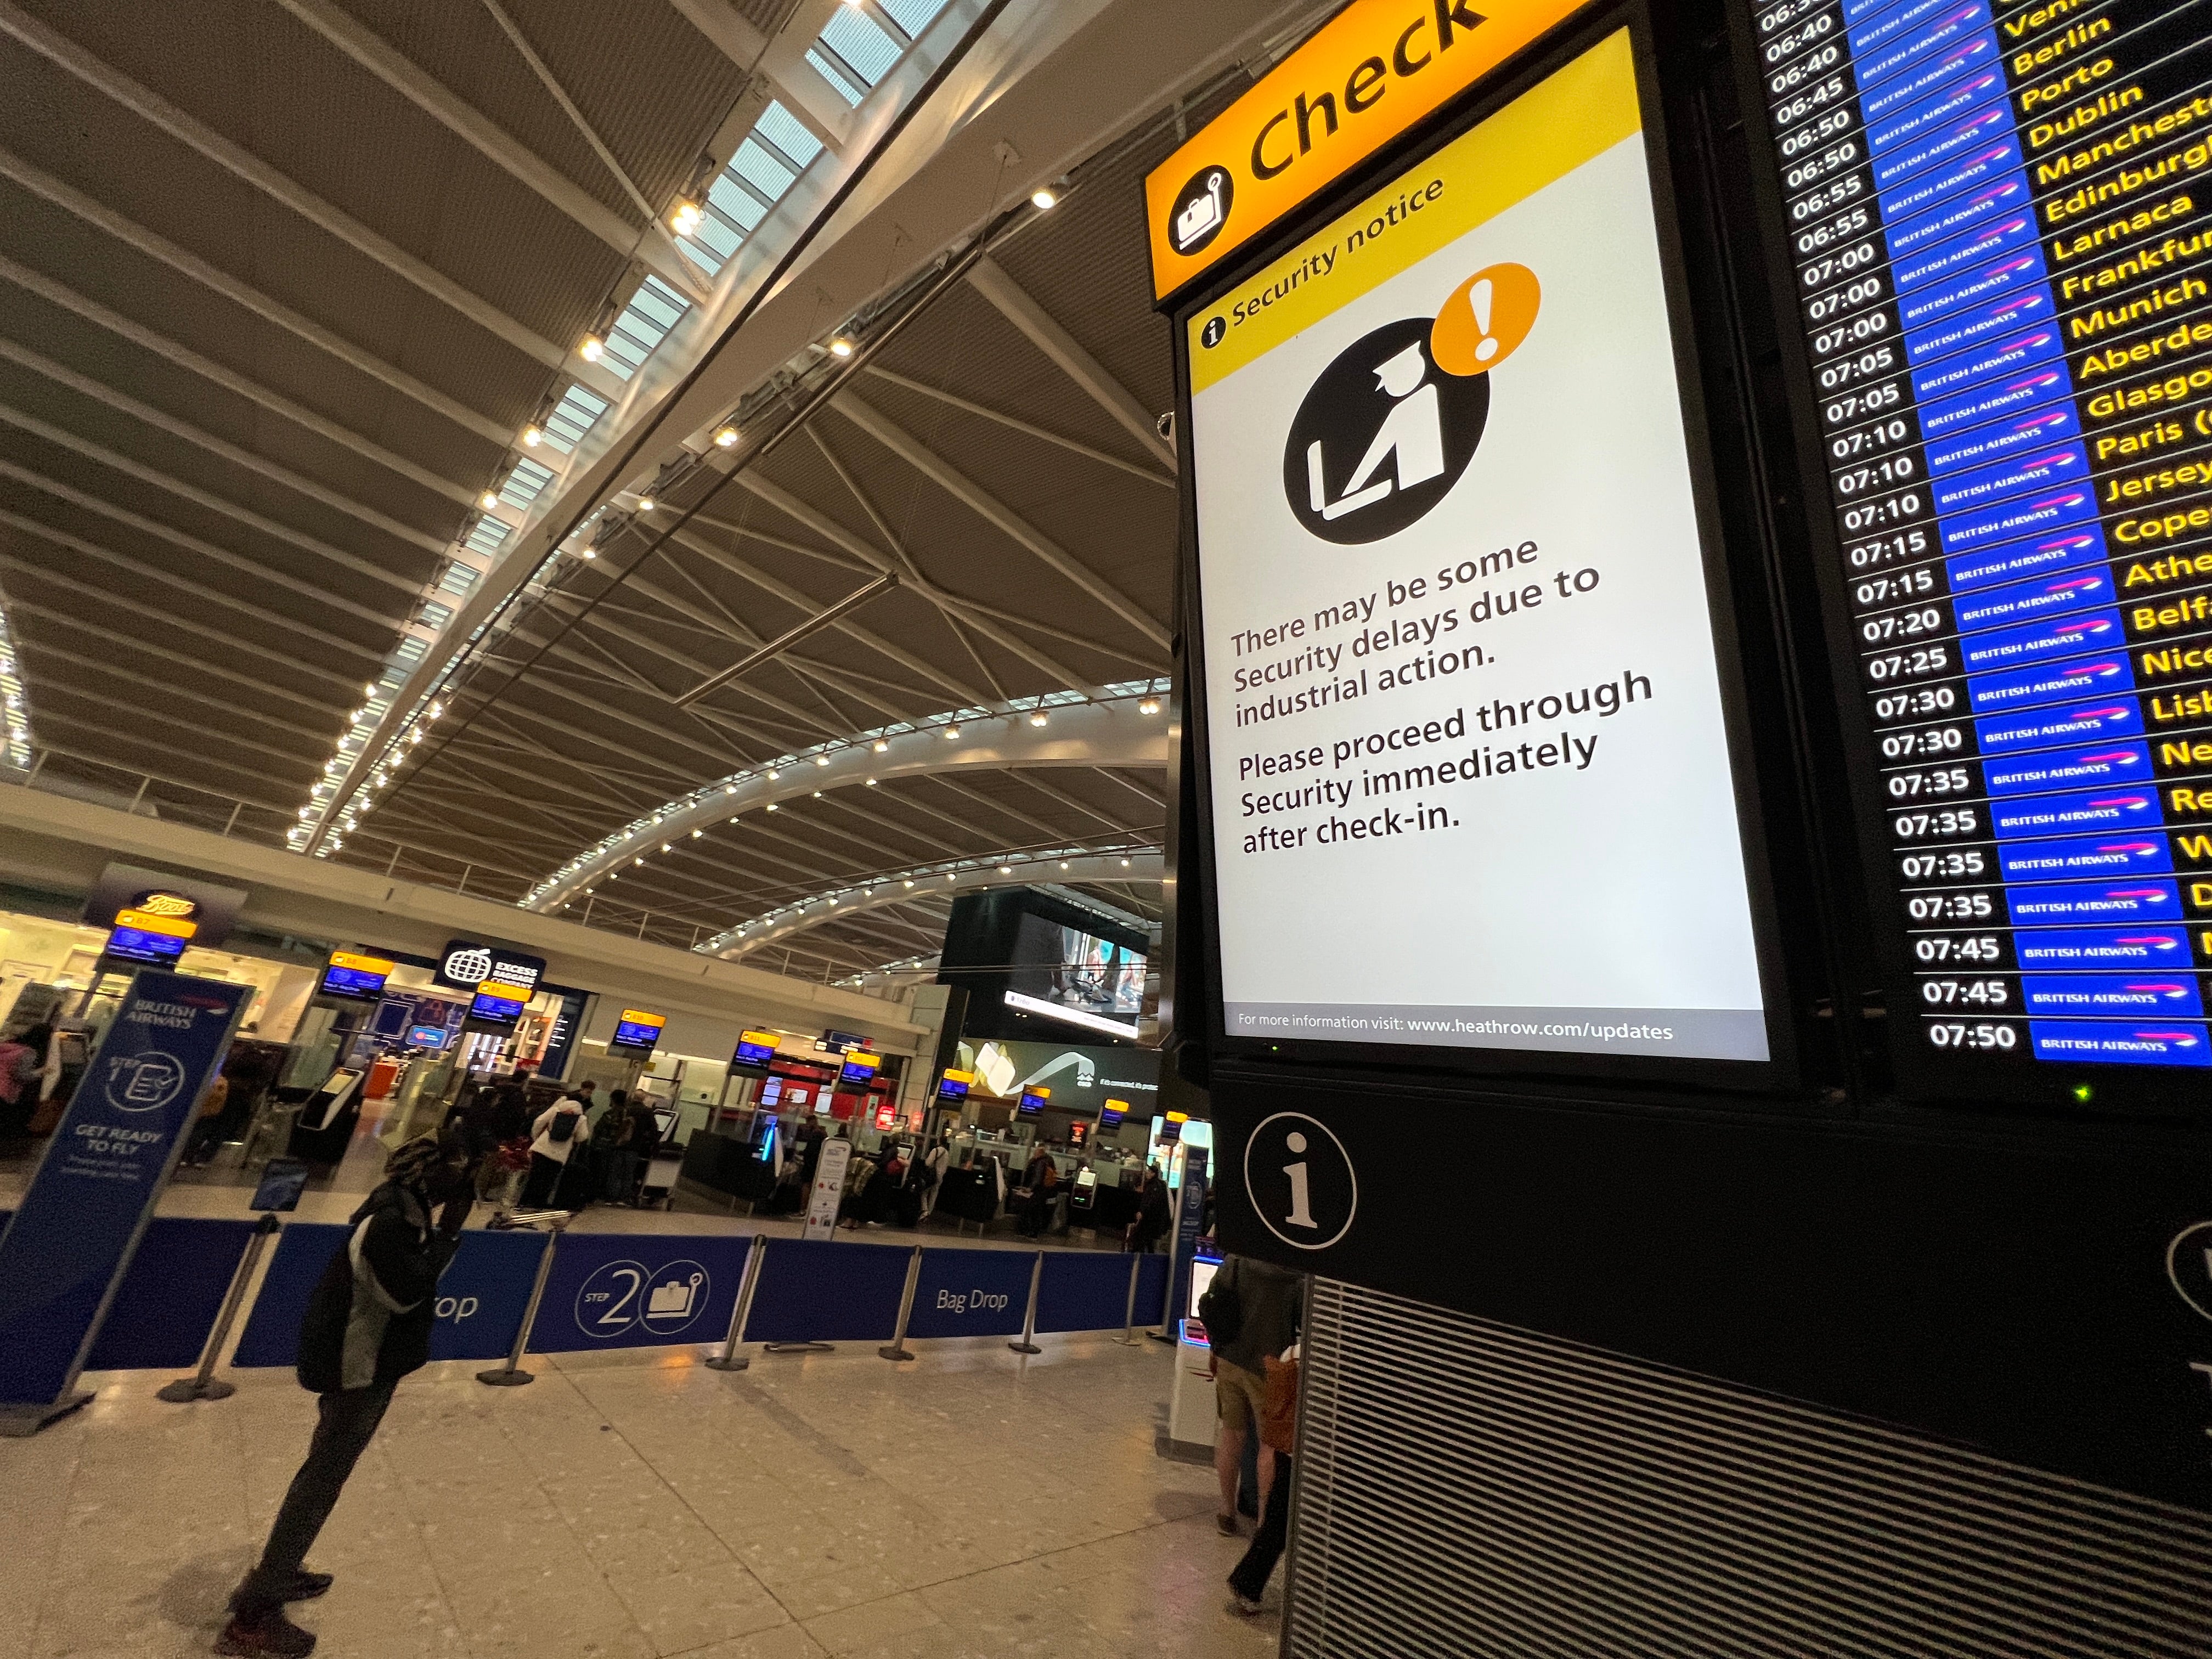 Go slow? Signs at Heathrow airport Terminal 5 warn of possible delays at security during earlier walk-outs